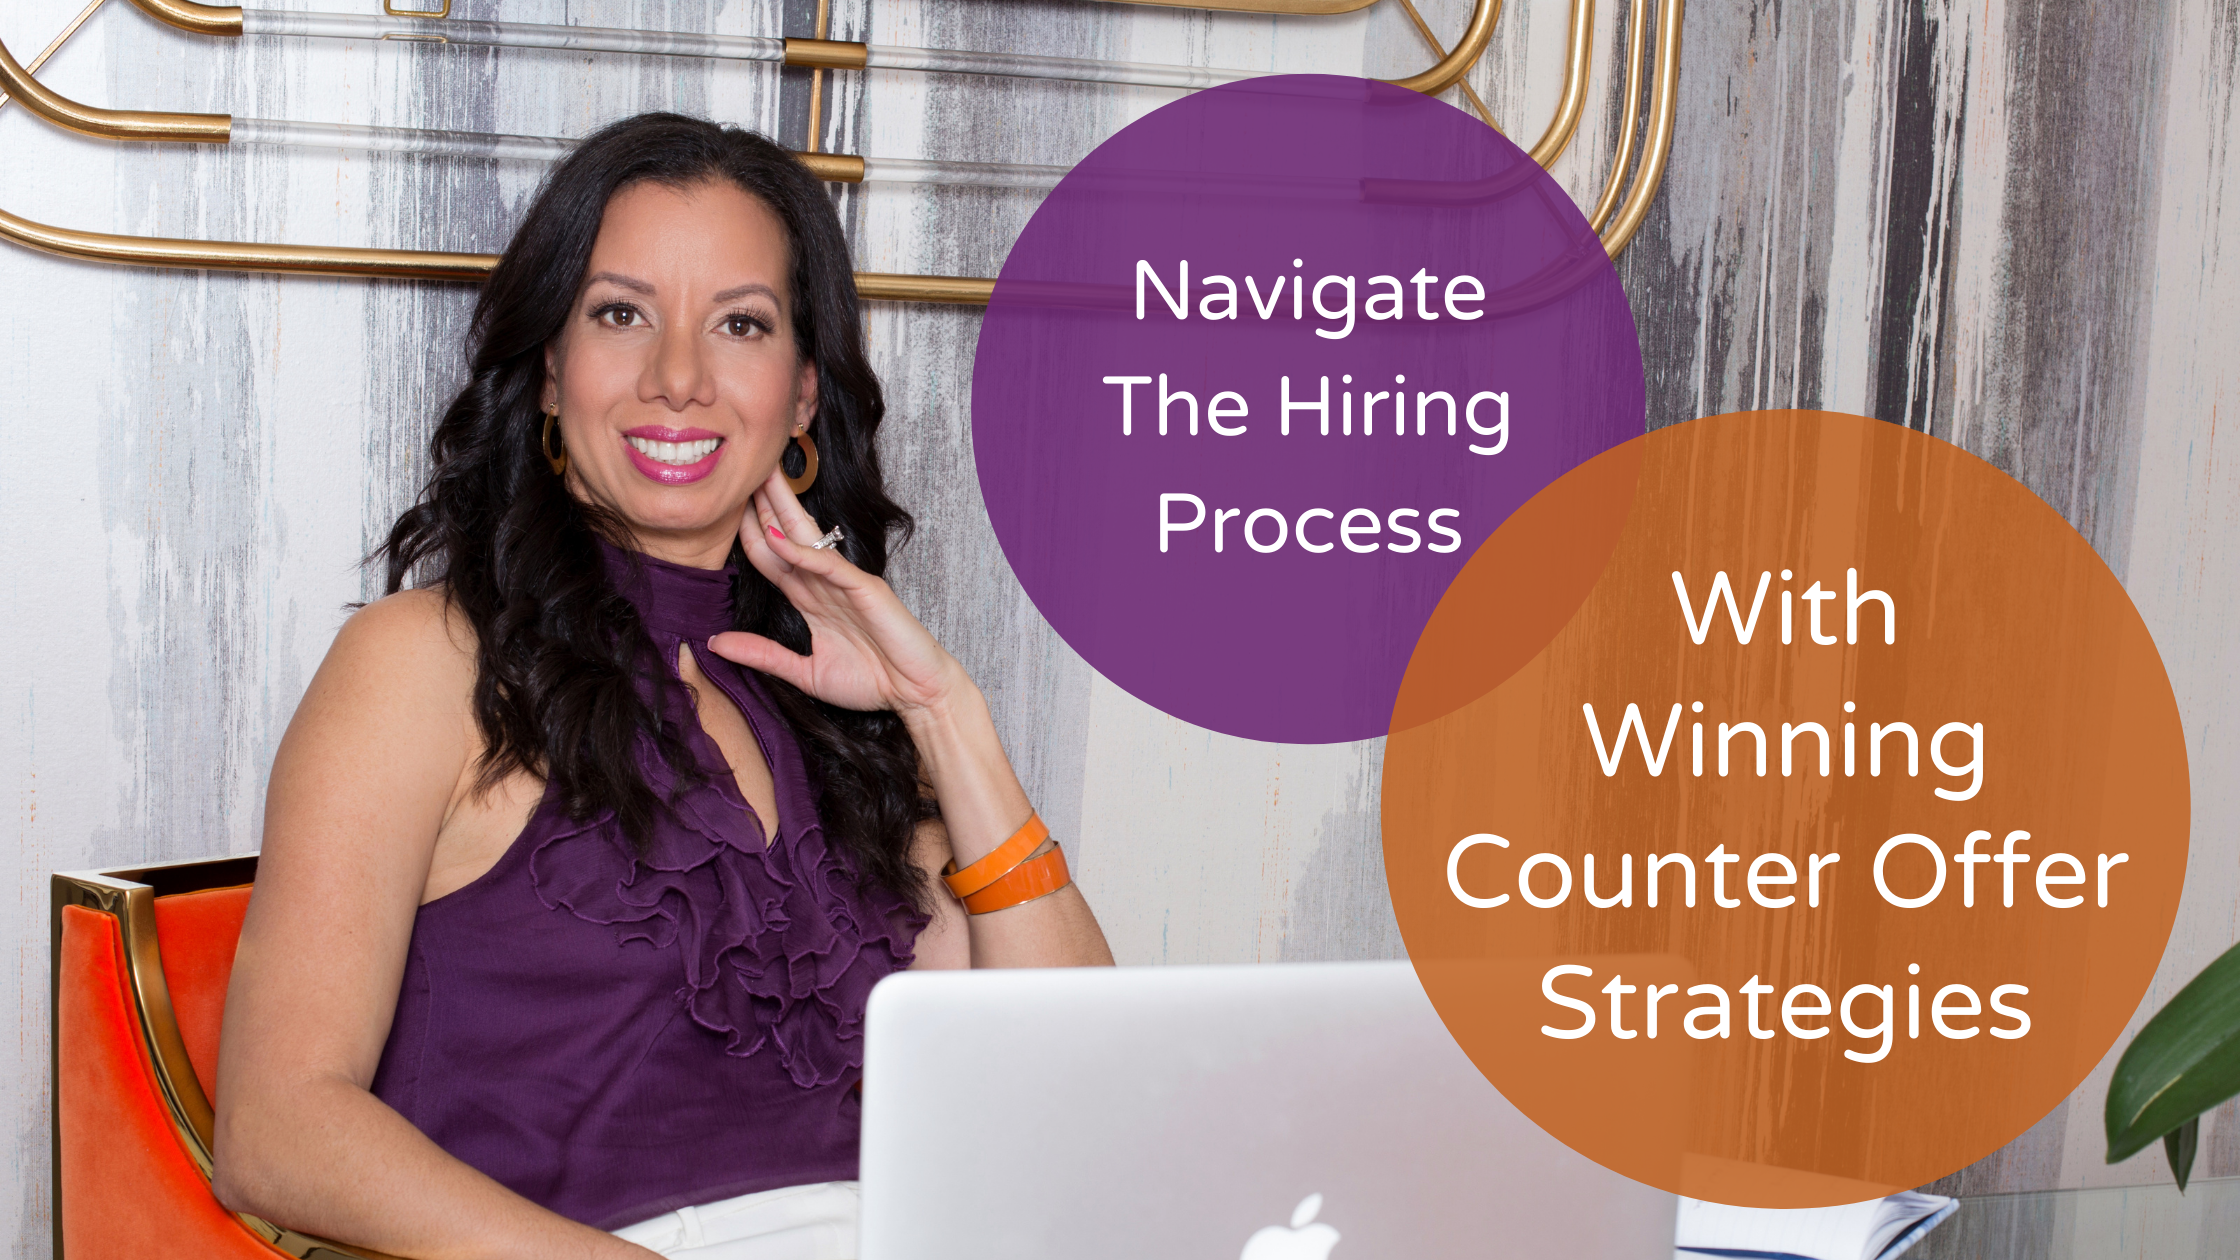 Navigate The Hiring Process With Winning Counter Offer Strategies